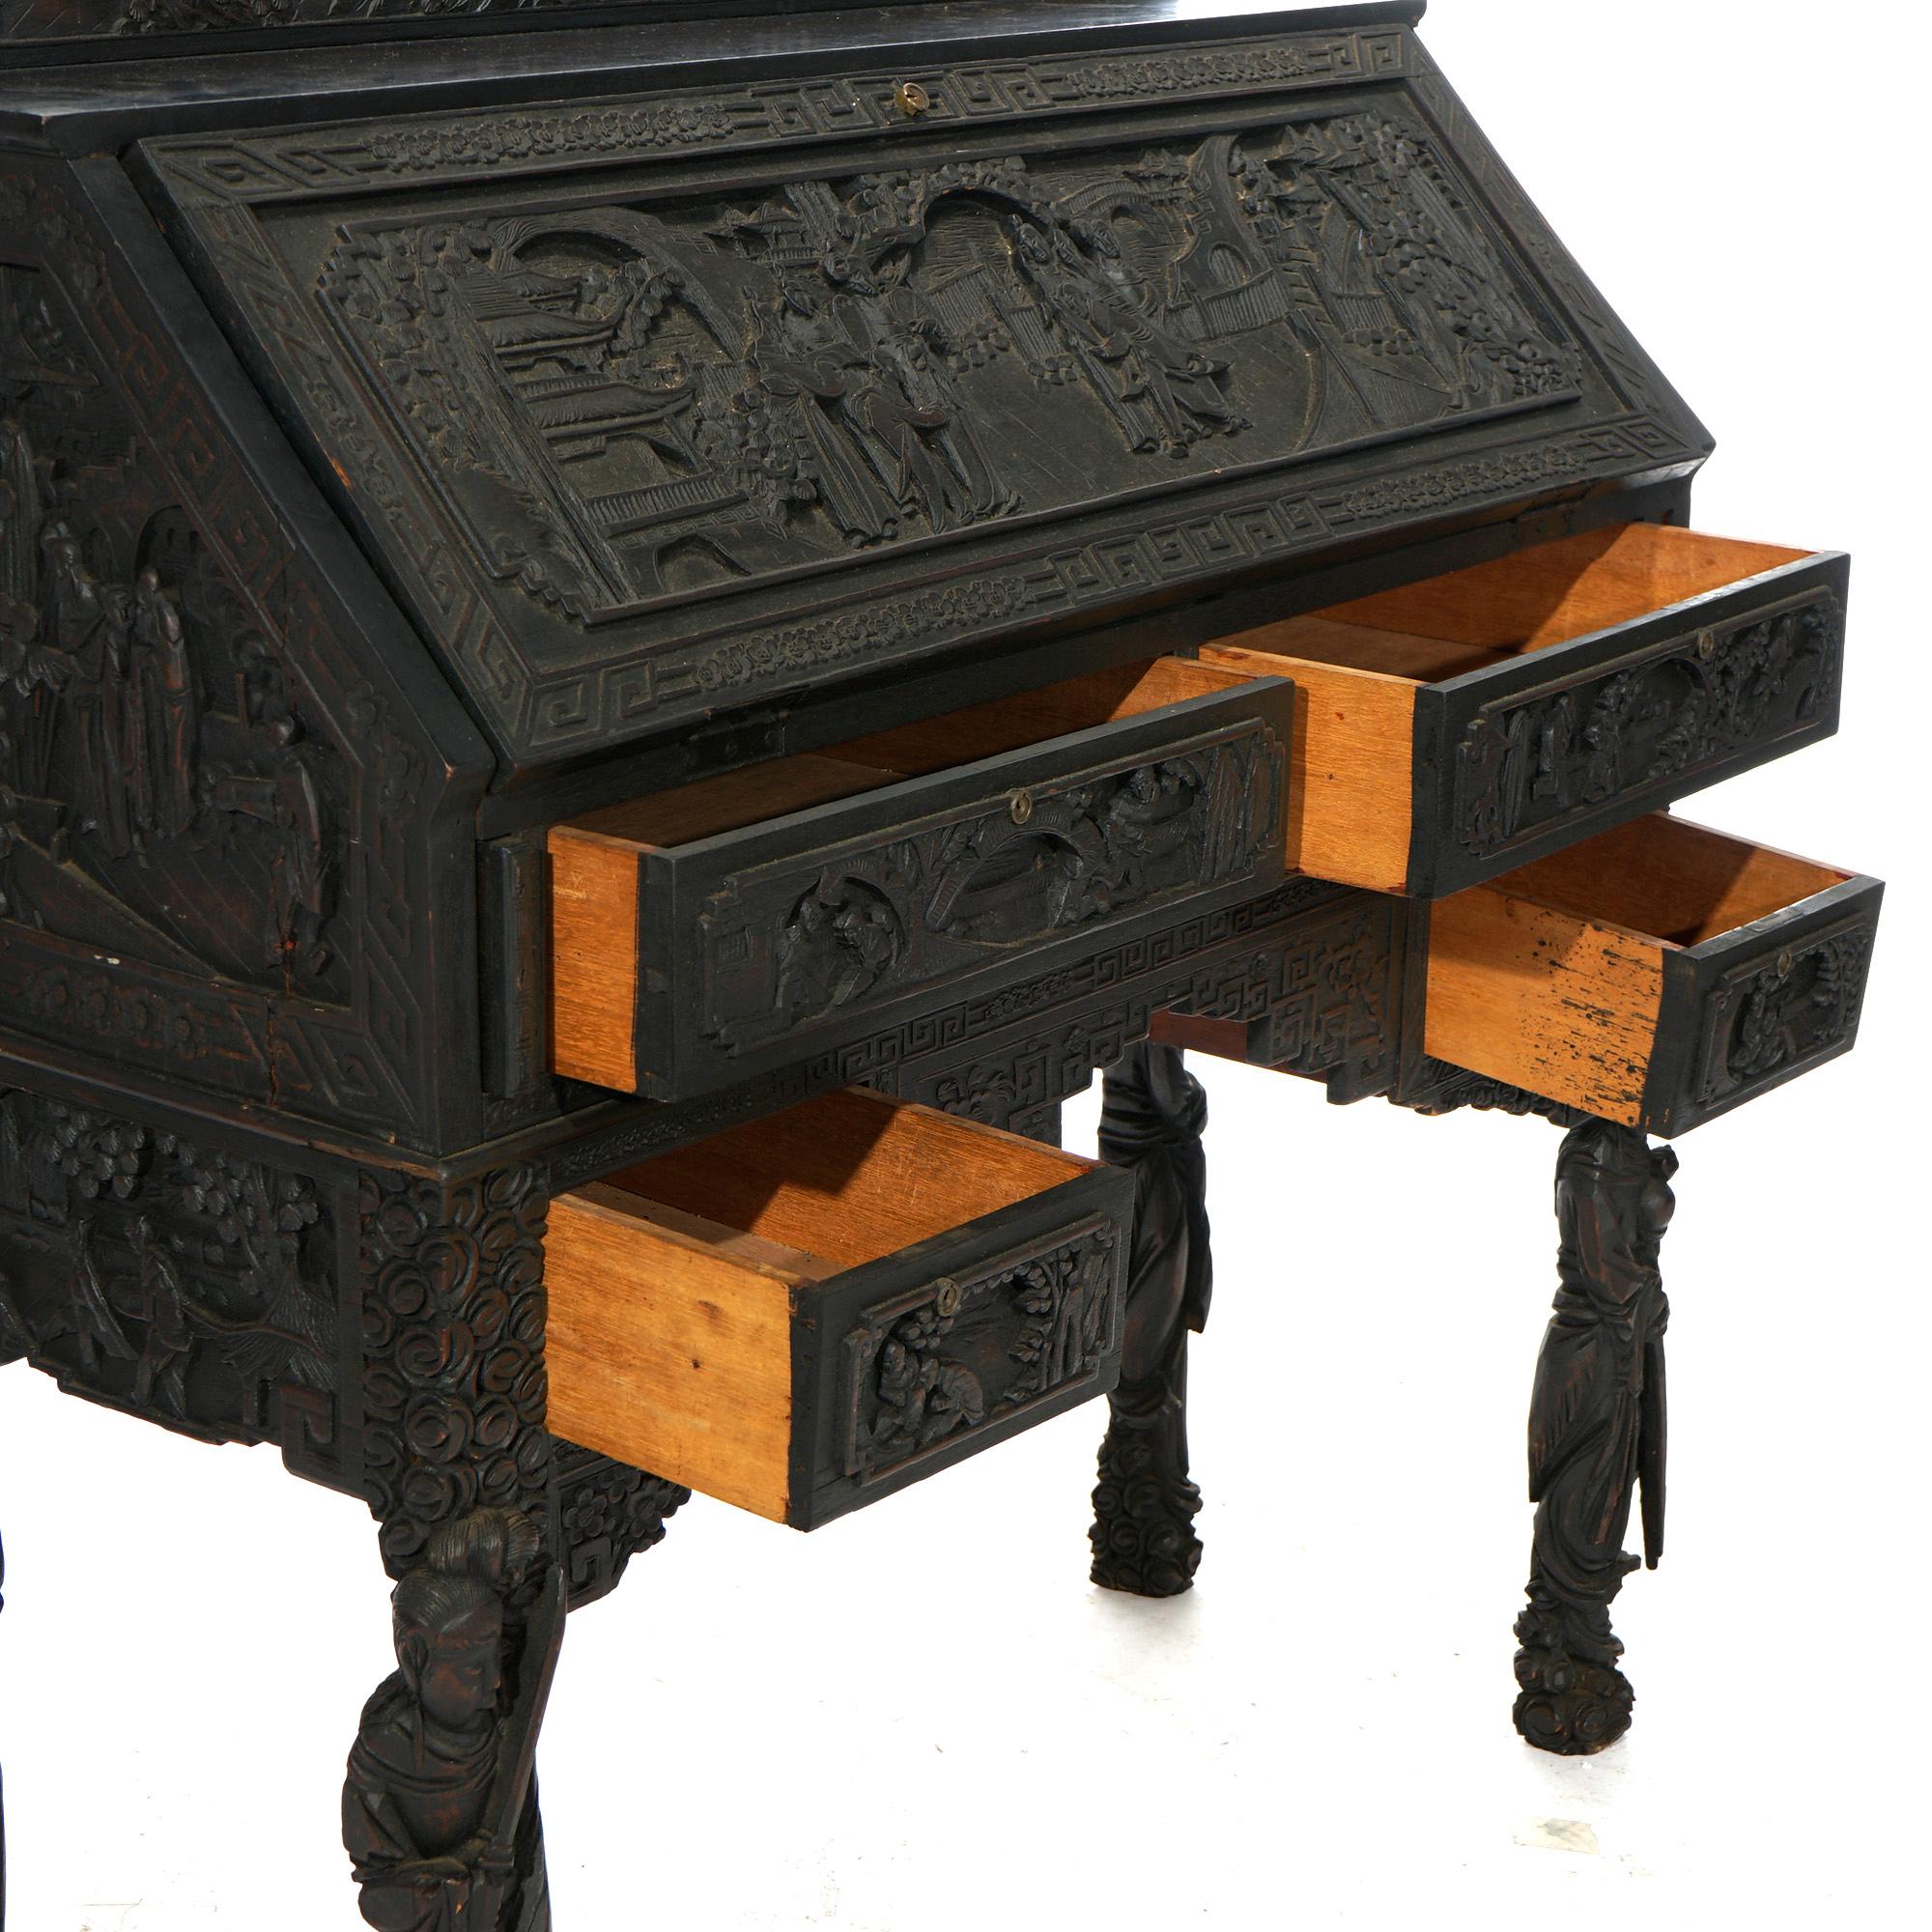 20th Century Antique Chinese Figural Carved Hardwood Drop Front Desk & Chair Circa 1900